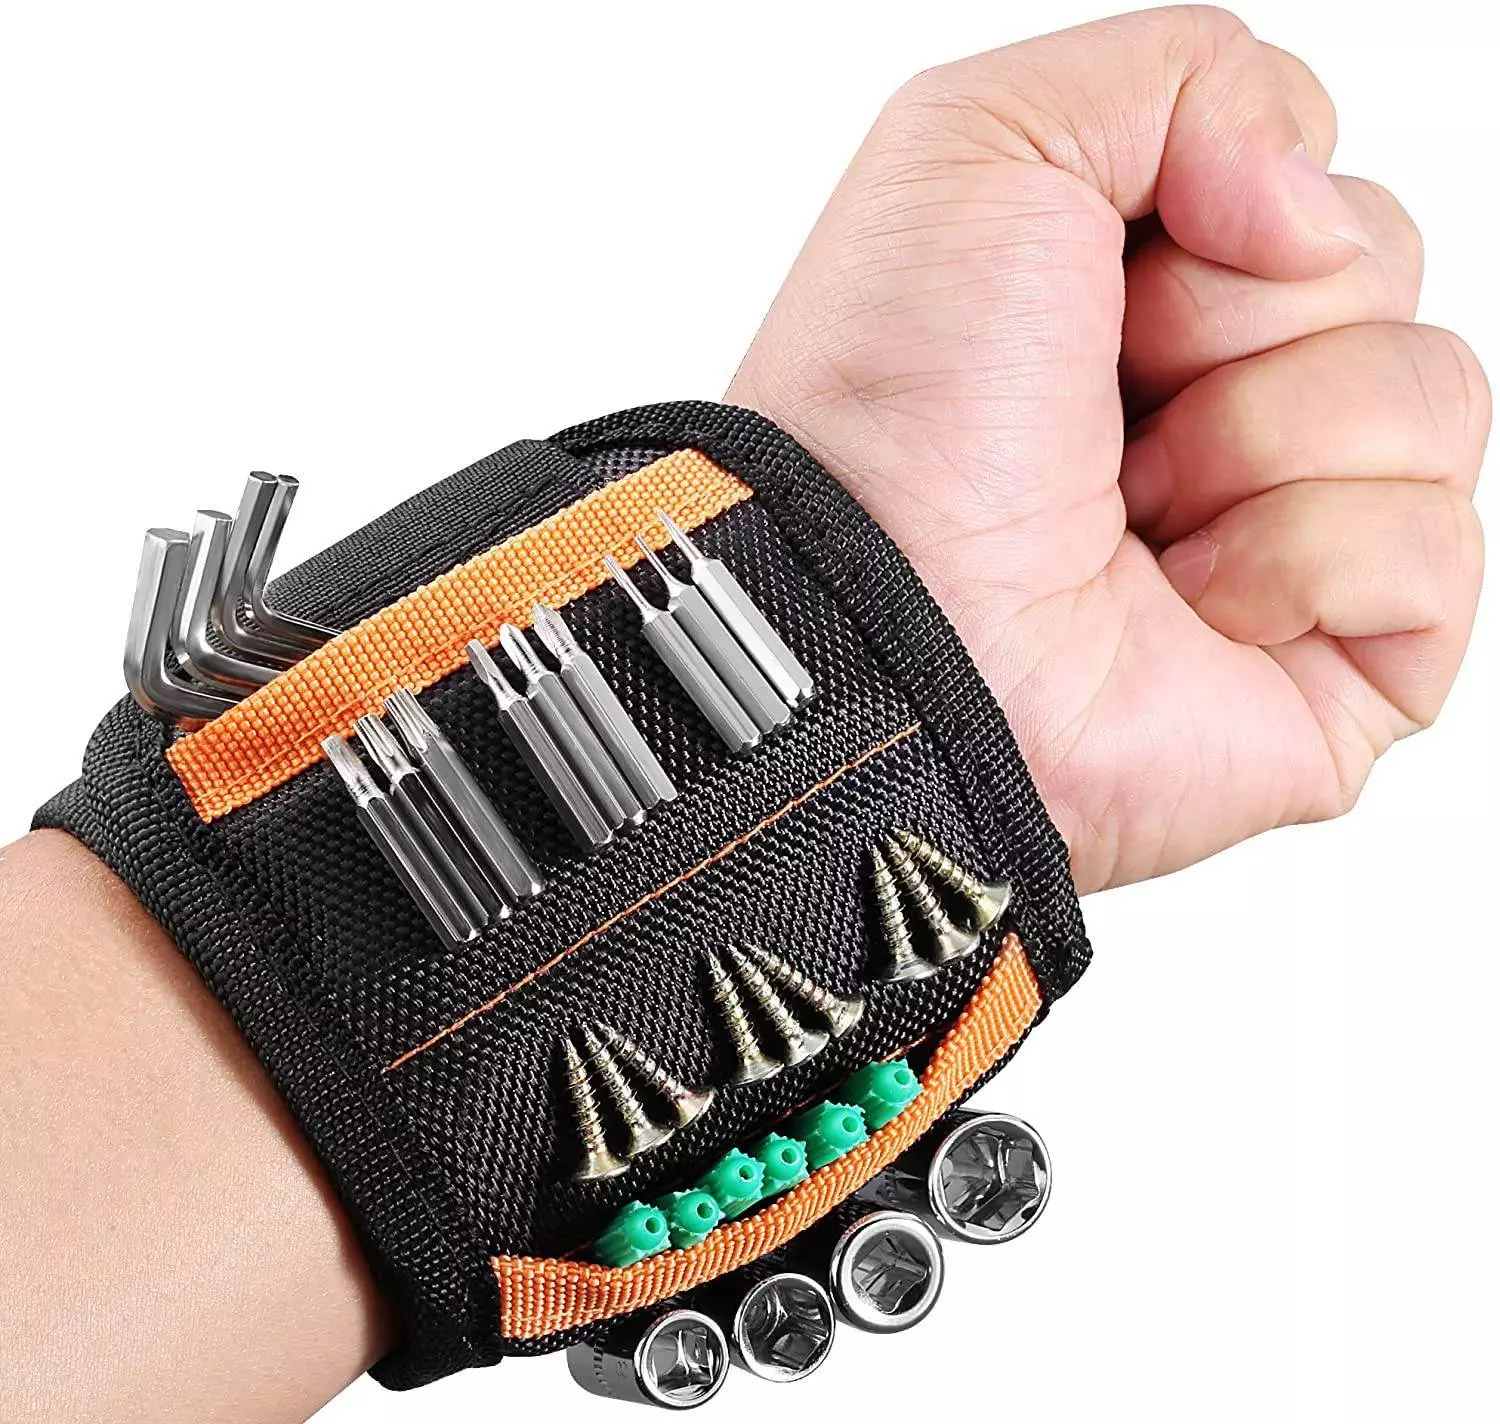 Upgraded Magnetic Wristband for Holding Screws, Nails, Drill Bits and Small Tools, Best Gifts for Dad/Father, Husband and Boyfriend, Tool Belt